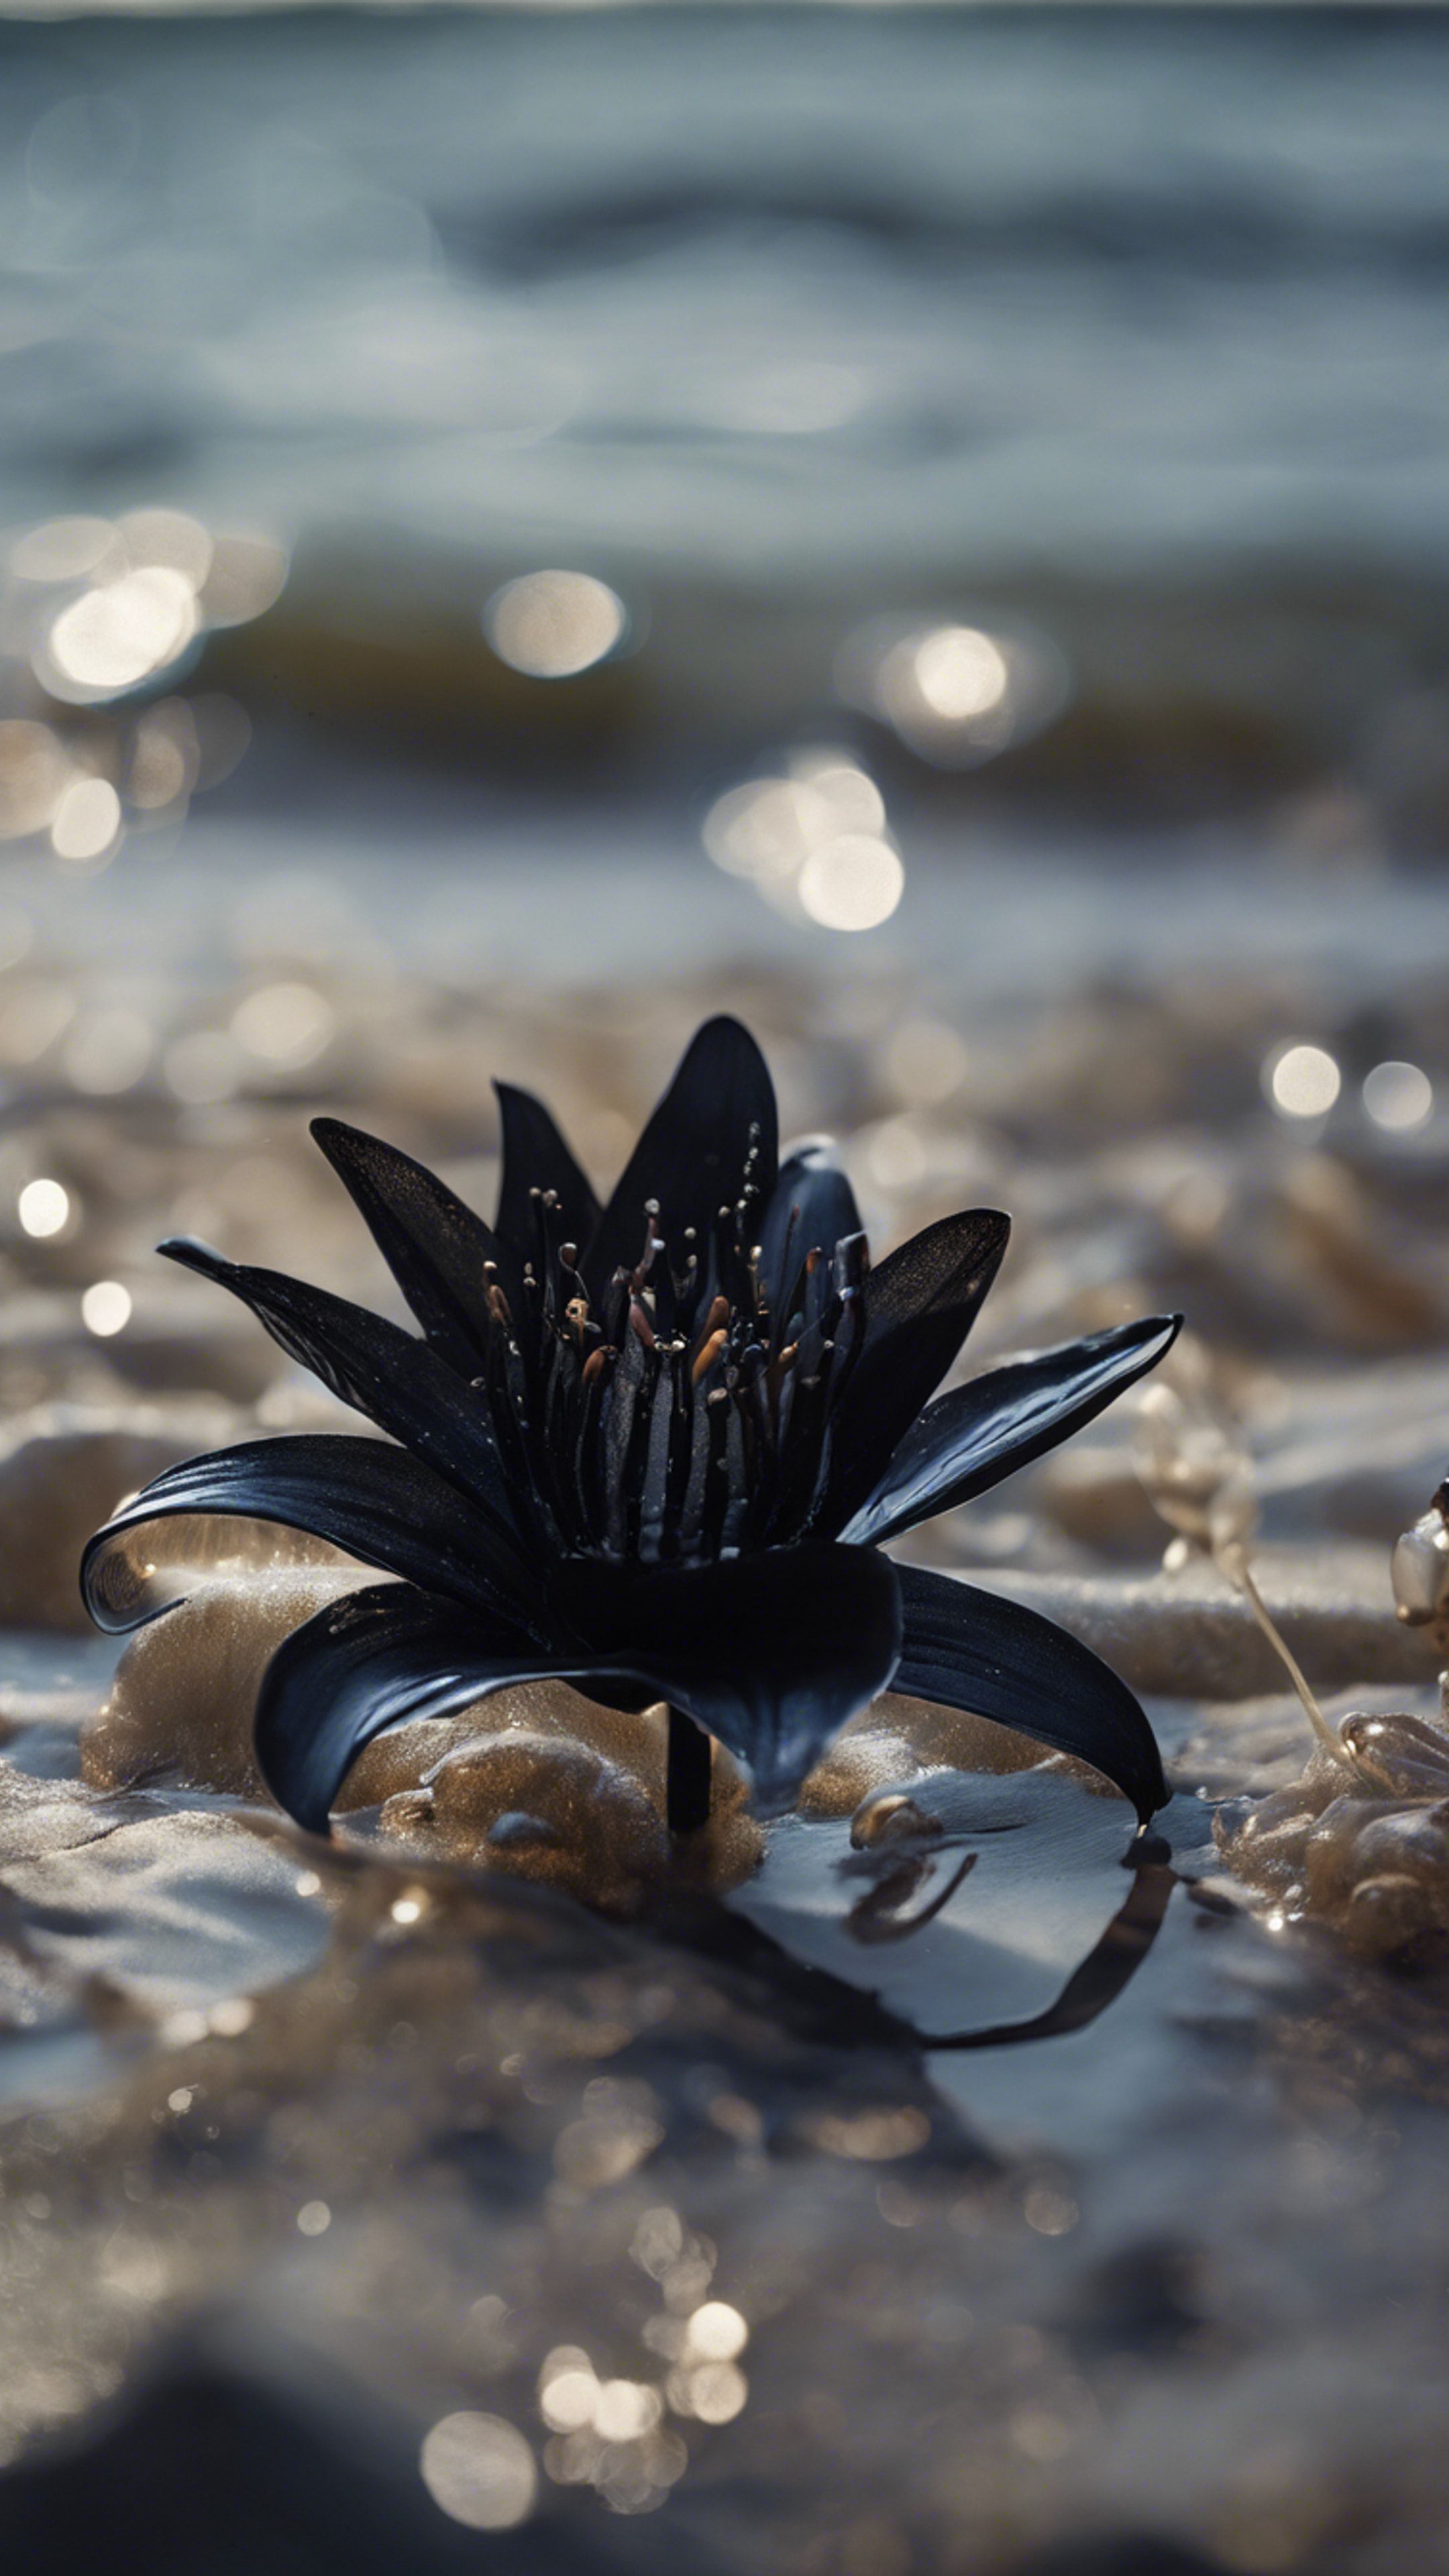 A black lily hiding under the tide, revealed only when the ocean pulls away, revealing the dark secrets of the sea bed. Tapeta[3833c30c18c941348380]